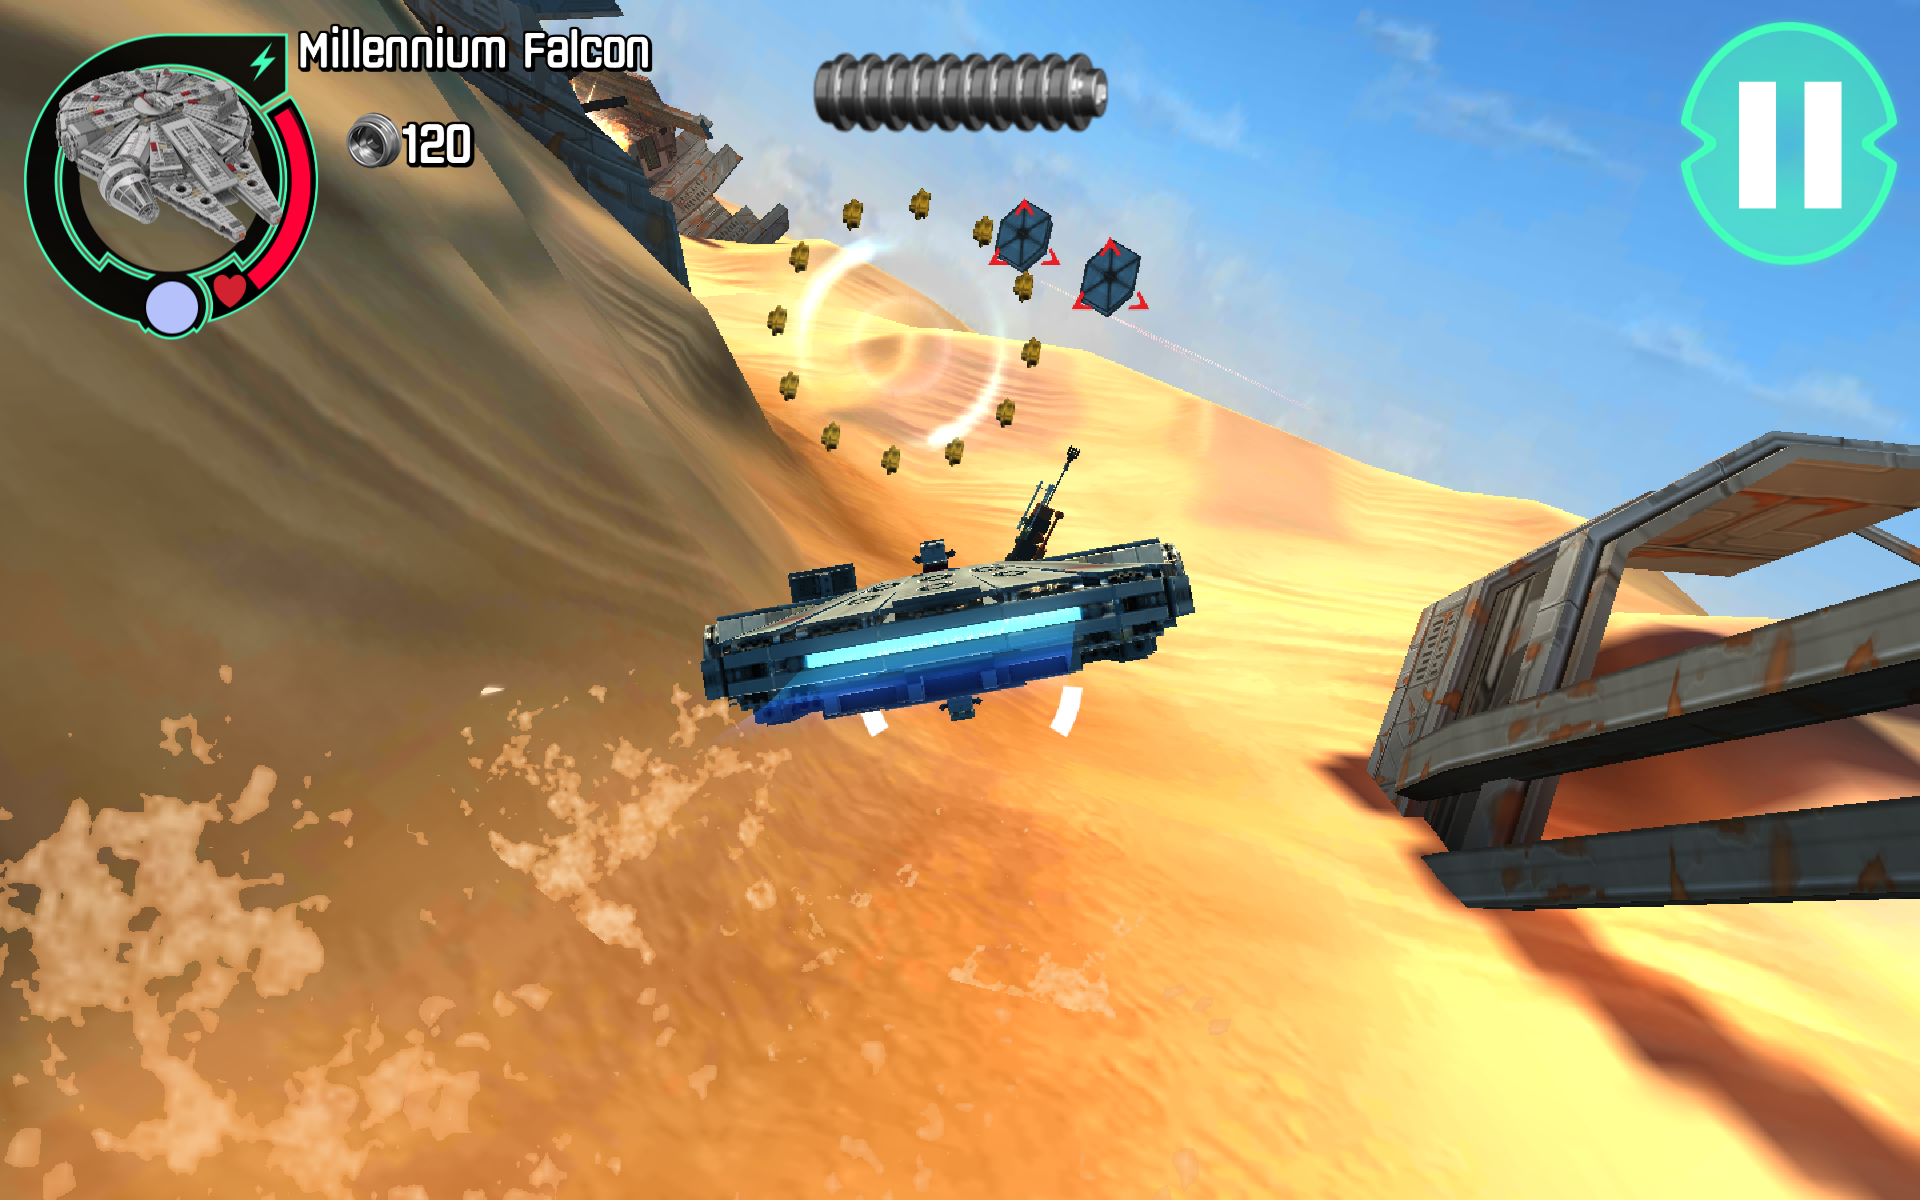 Top Lego Star Wars The Force Awakens TFA Guide APK for Android Download